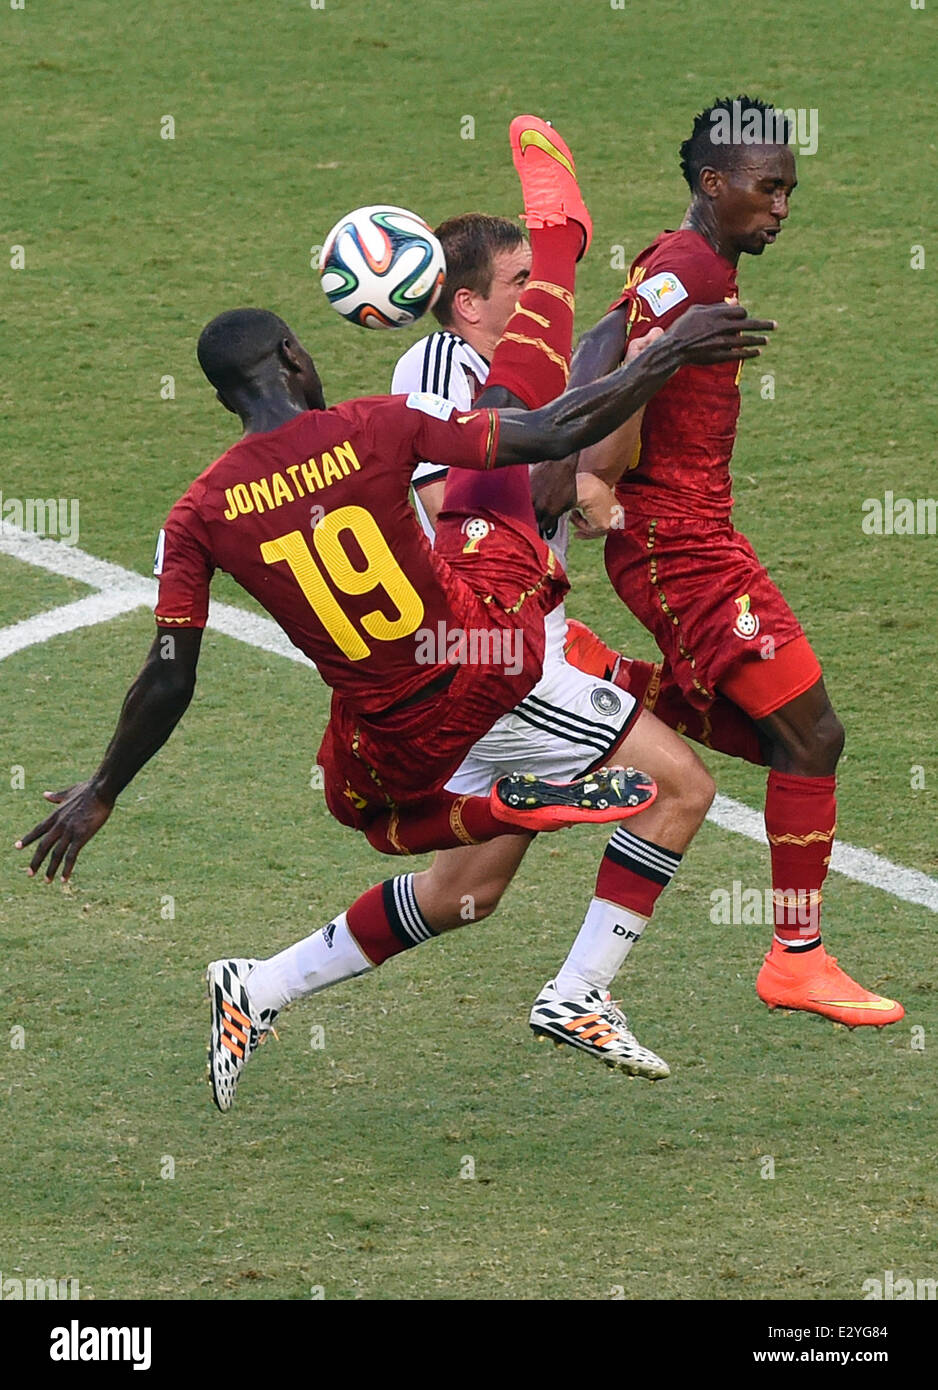 Fortaleza, Brazil. 21st June, 2014. Ghana's Jonathan Mensah (L-R), Germany's Philipp Lahm and Ghana's Harrison Afful vie for the ball during the FIFA World Cup 2014 group G preliminary round match between Germany and Ghana at the Estadio Castelao Stadium in Fortaleza, Brazil, 21 June 2014. Photo: Marcus Brandt/dpa/Alamy Live News Stock Photo